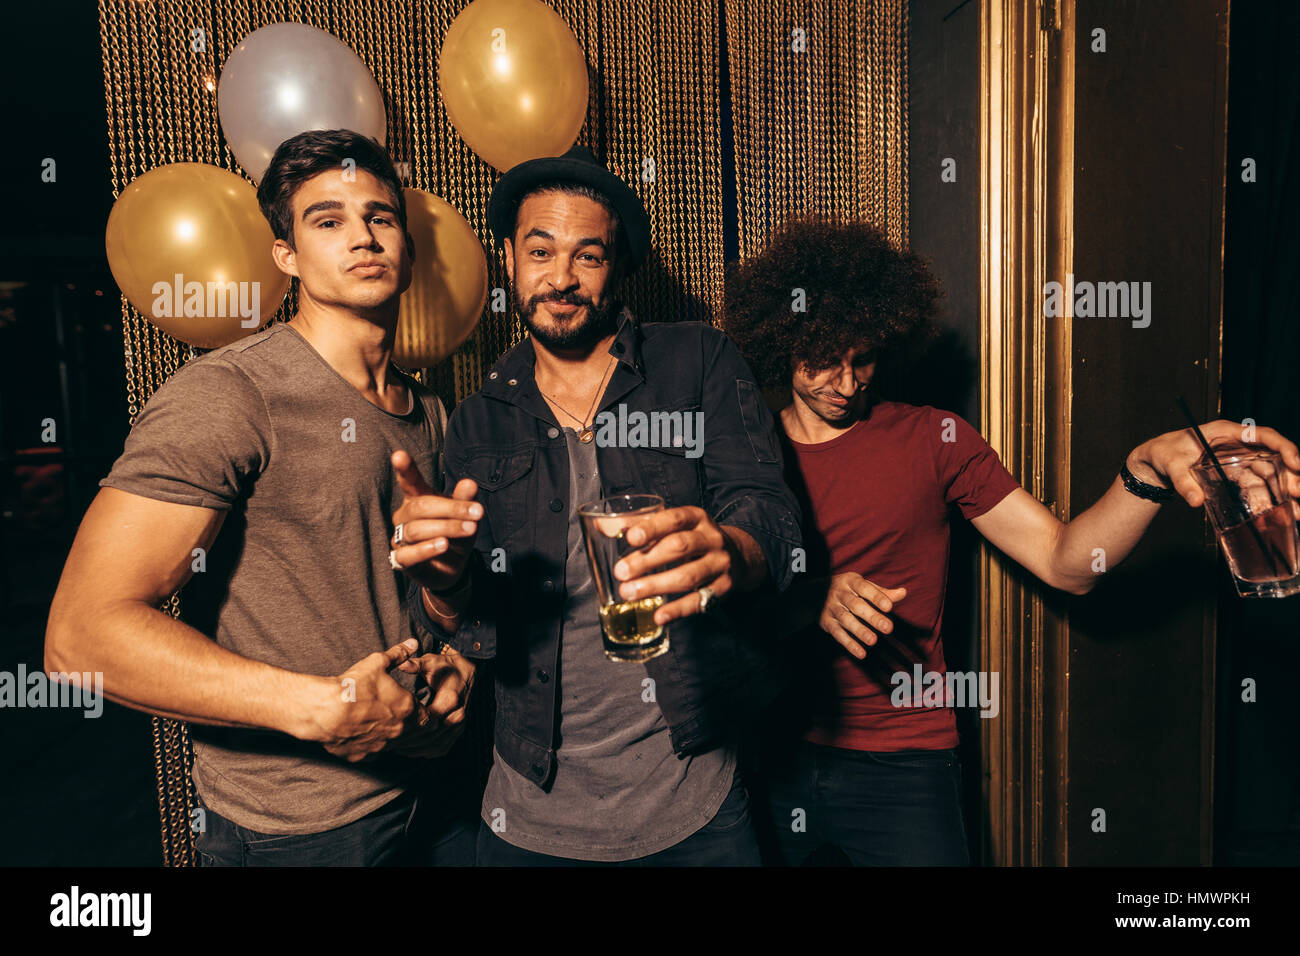 Portrait of three young men having fun at the nightclub. Group of men at  pub with drinks Stock Photo - Alamy